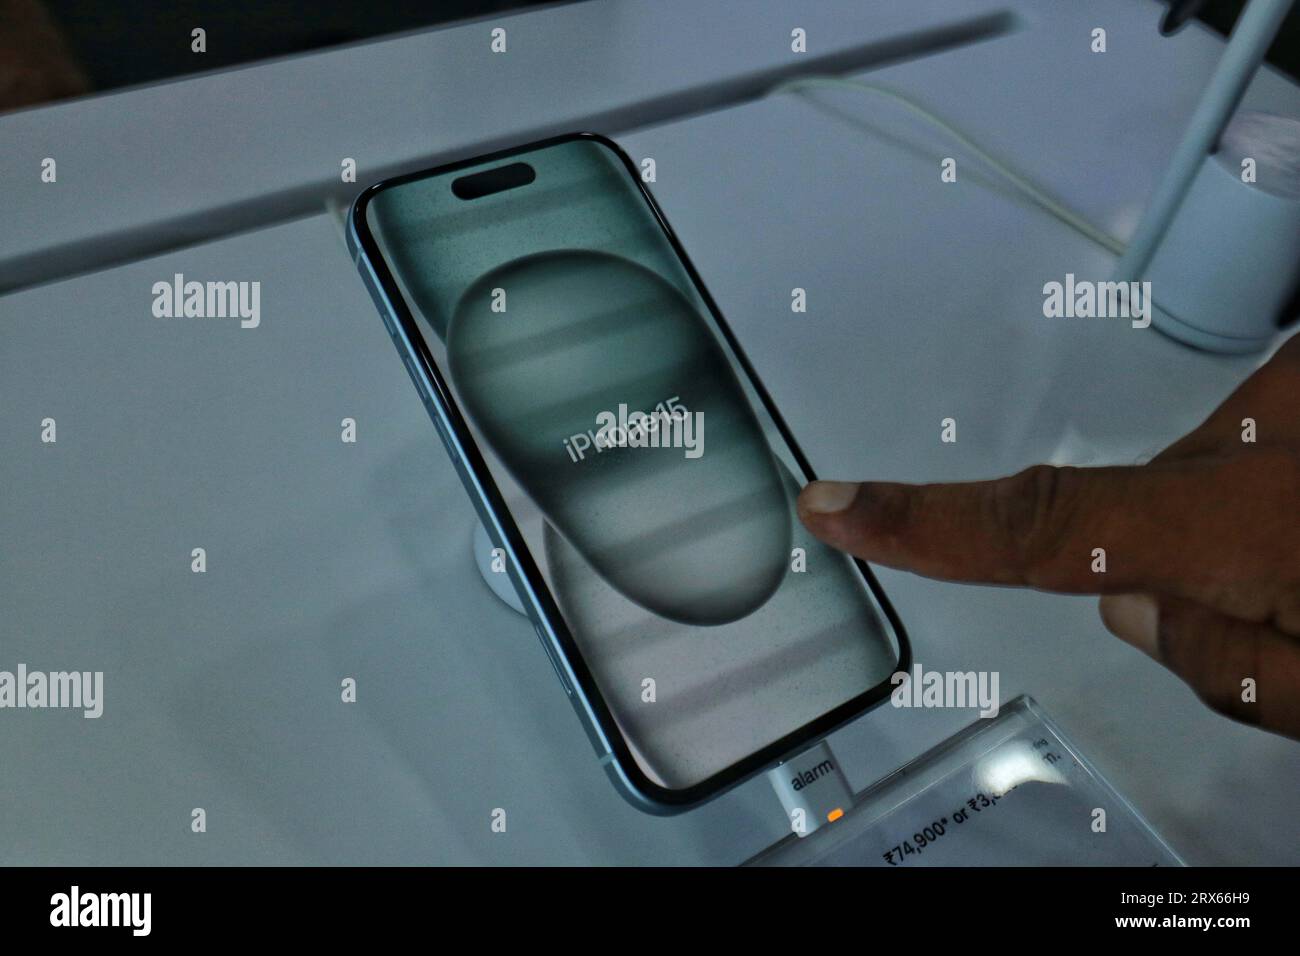 Paris, France - Sep 17, 2022: Display of the new Apple iPhone 15 Pro Max  featuring Asian characters during unboxing and setup Stock Photo - Alamy